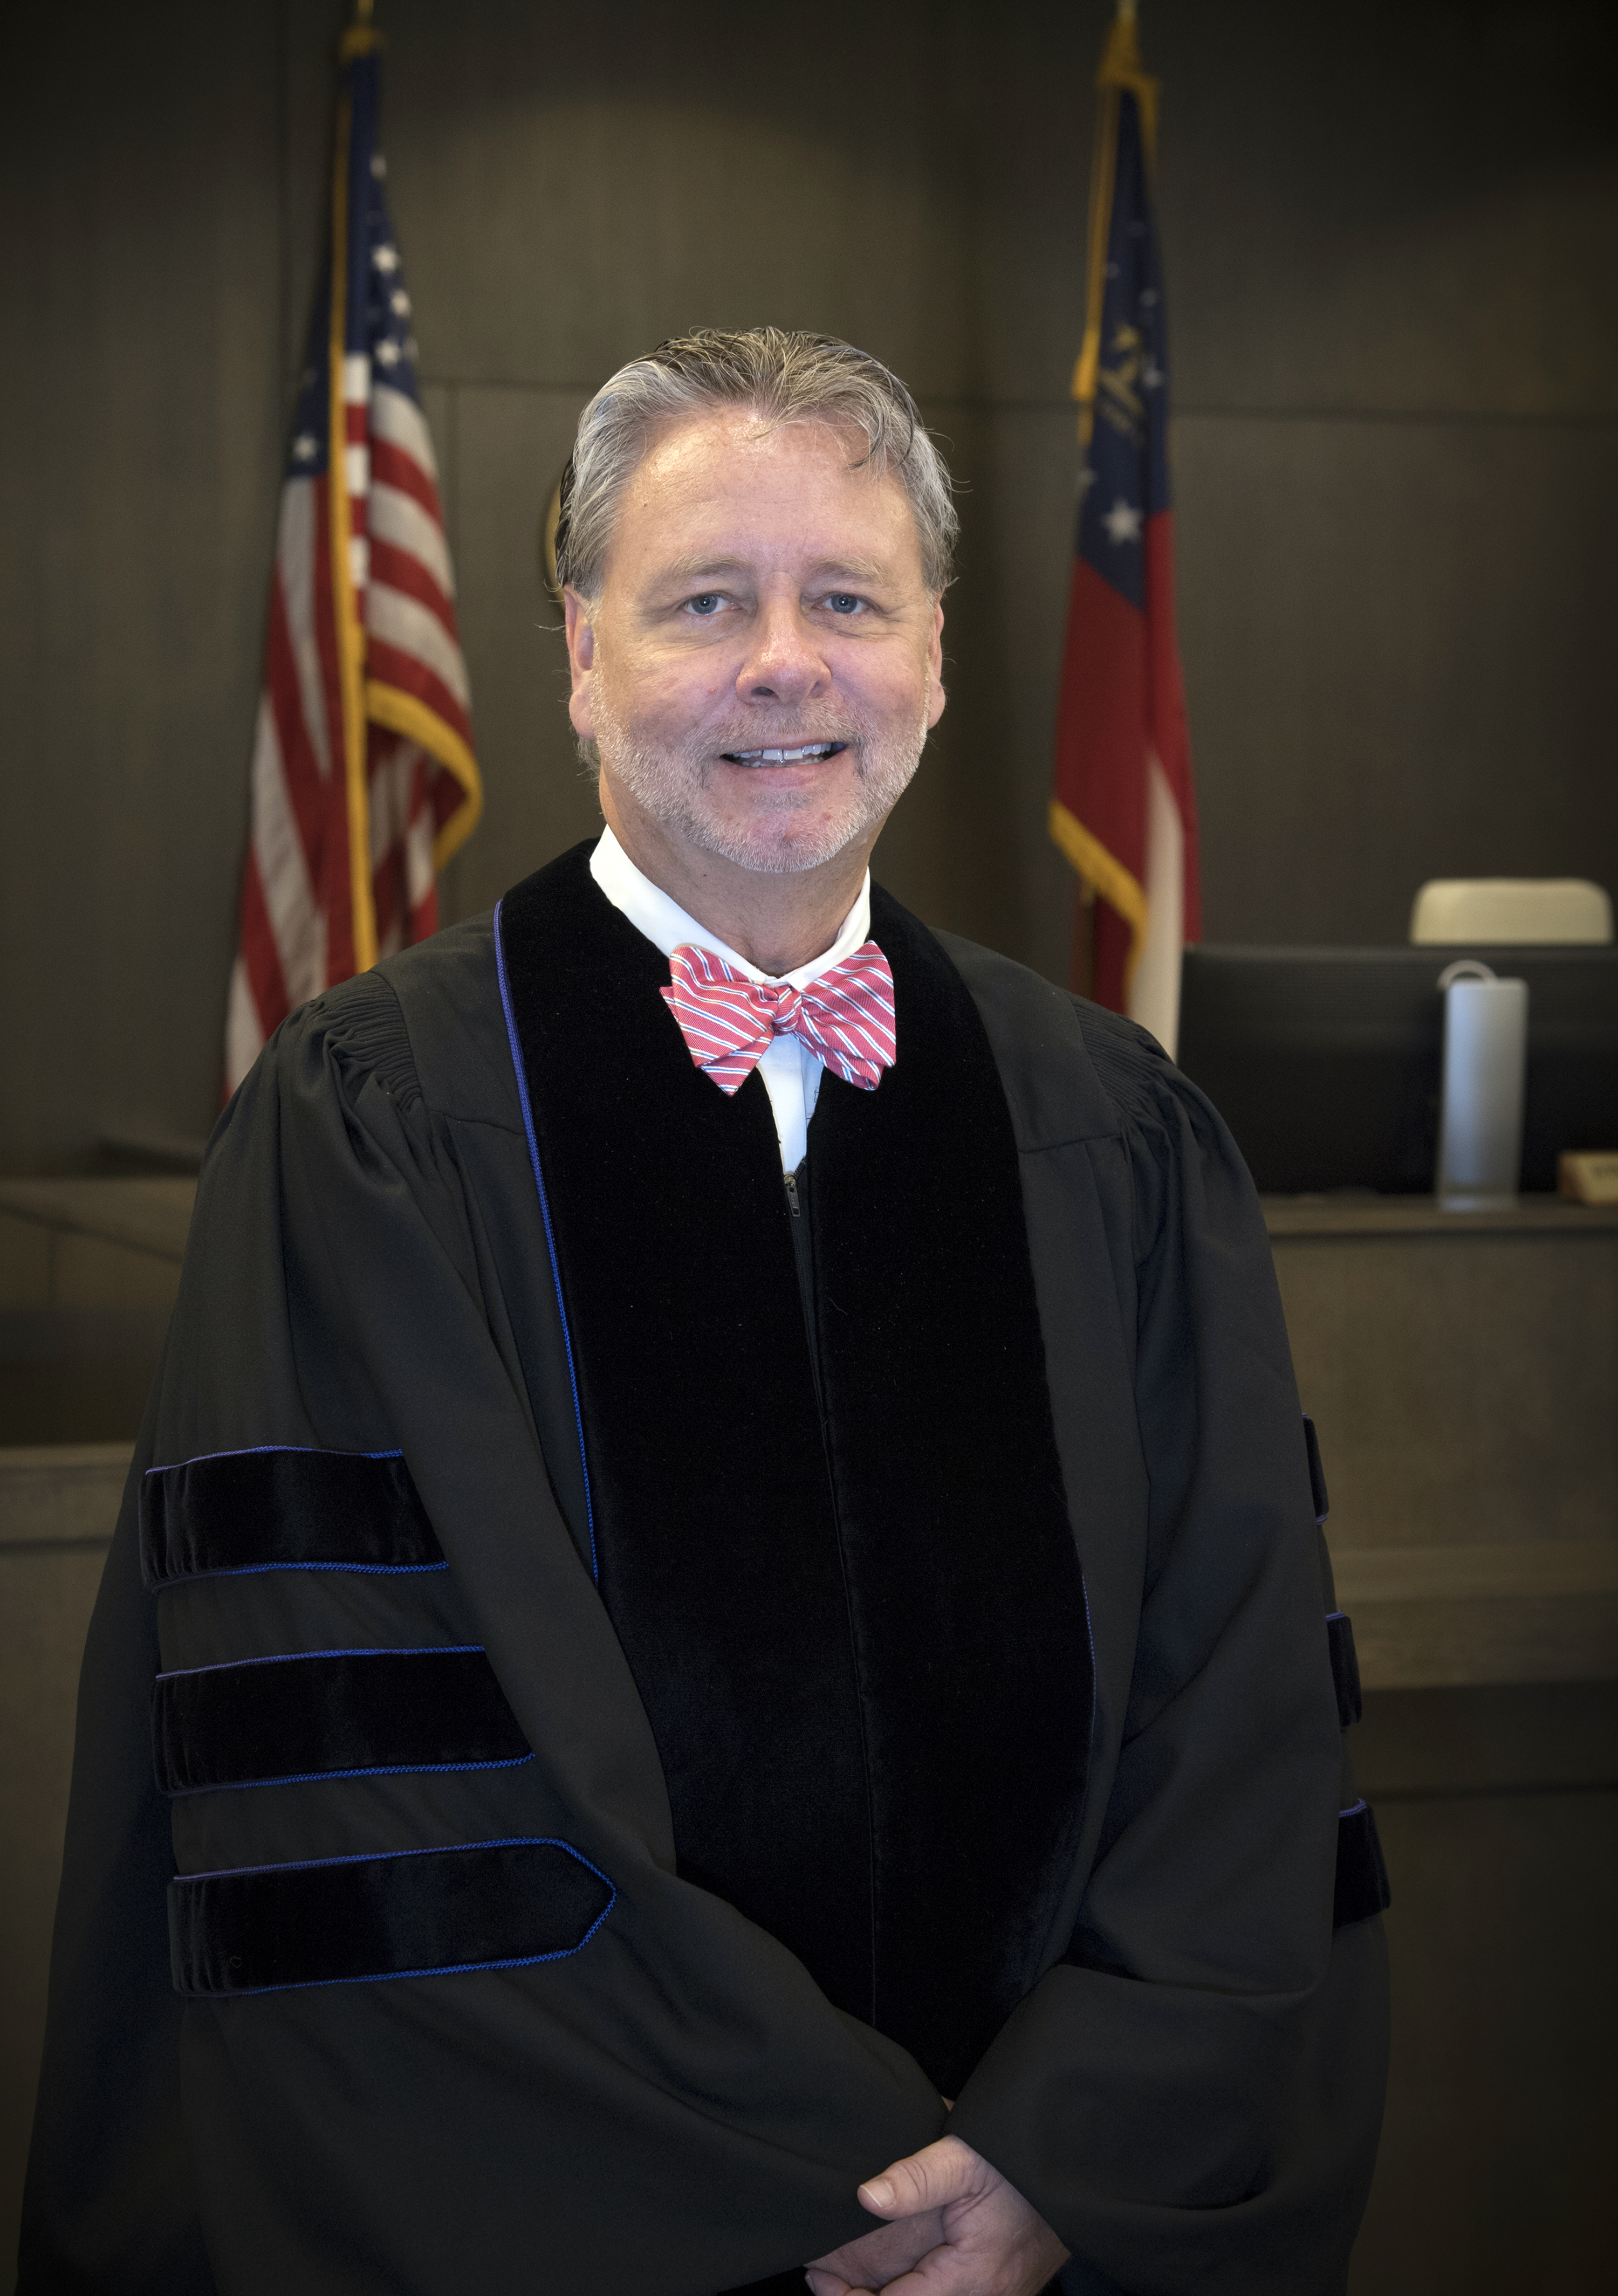 Juvenile Court judge honored with national award Juvenile Law Center